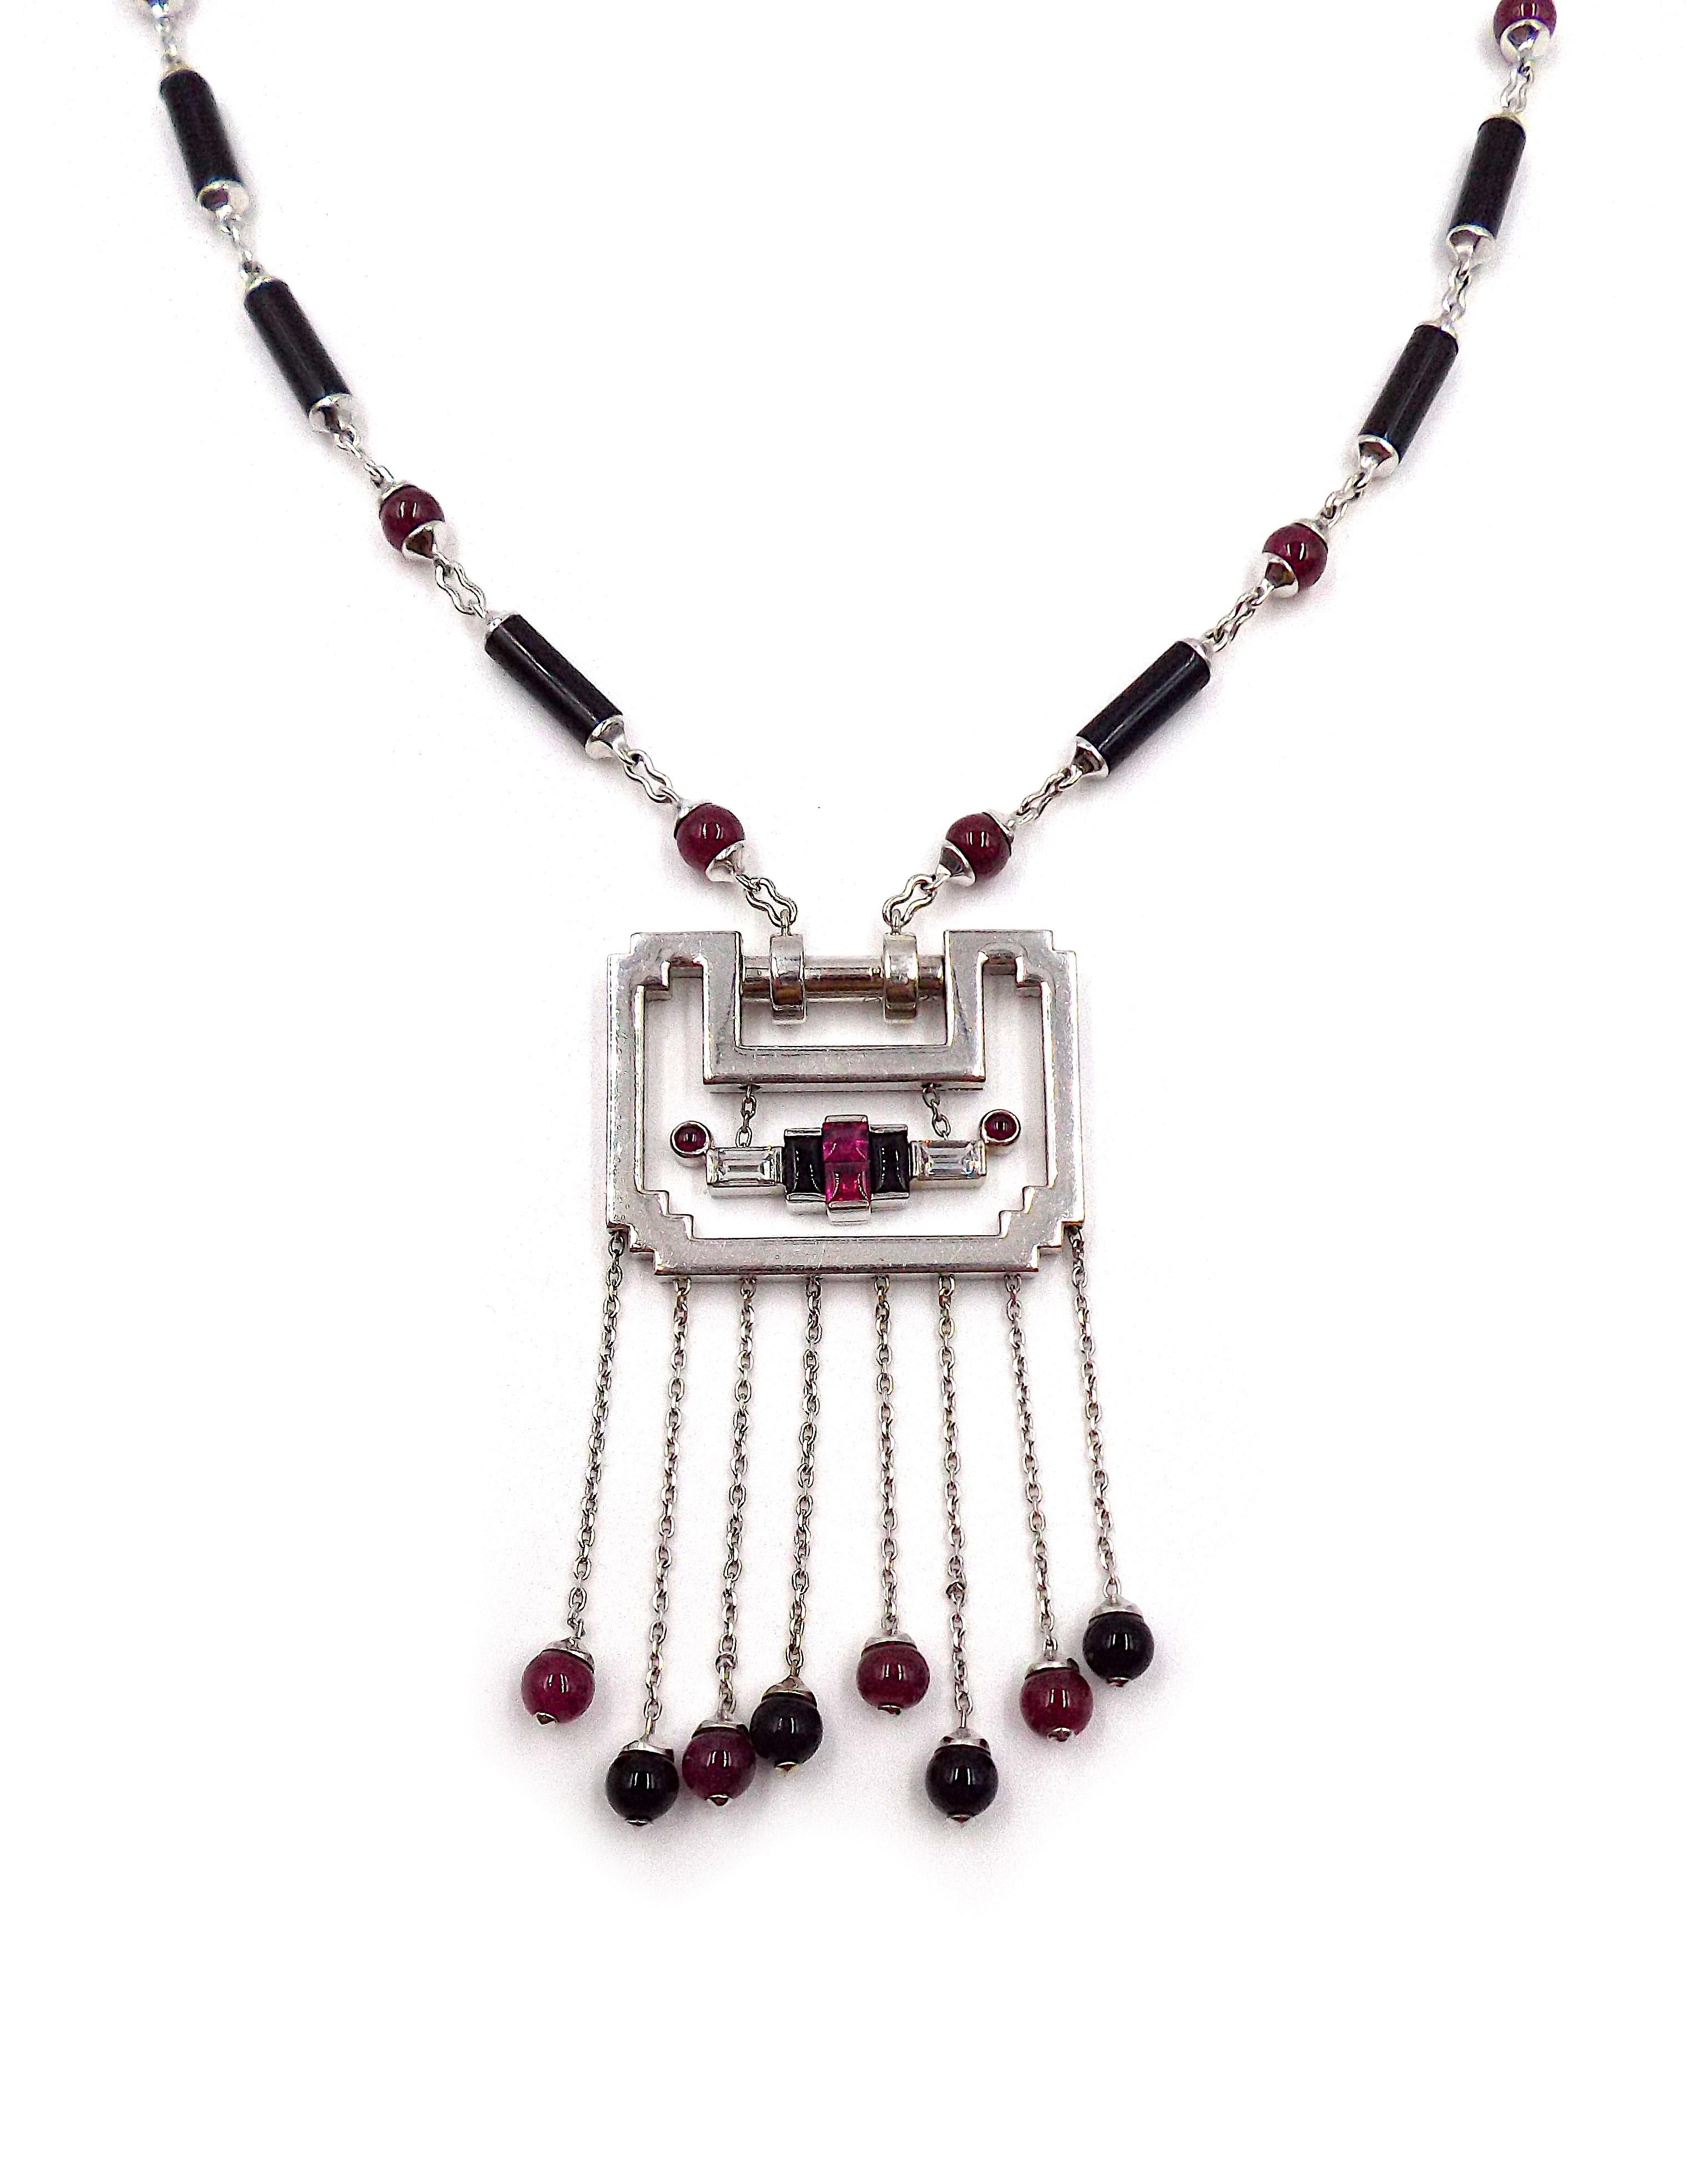 Suspending a pendant, designed as an 18k white gold open frame with fringe enhanced by ruby and onyx bead terminals, to the neckchain designed as an alternating series of onyx barrel-shaped links spaced by ruby beads, 17 1/4 ins., with French assay